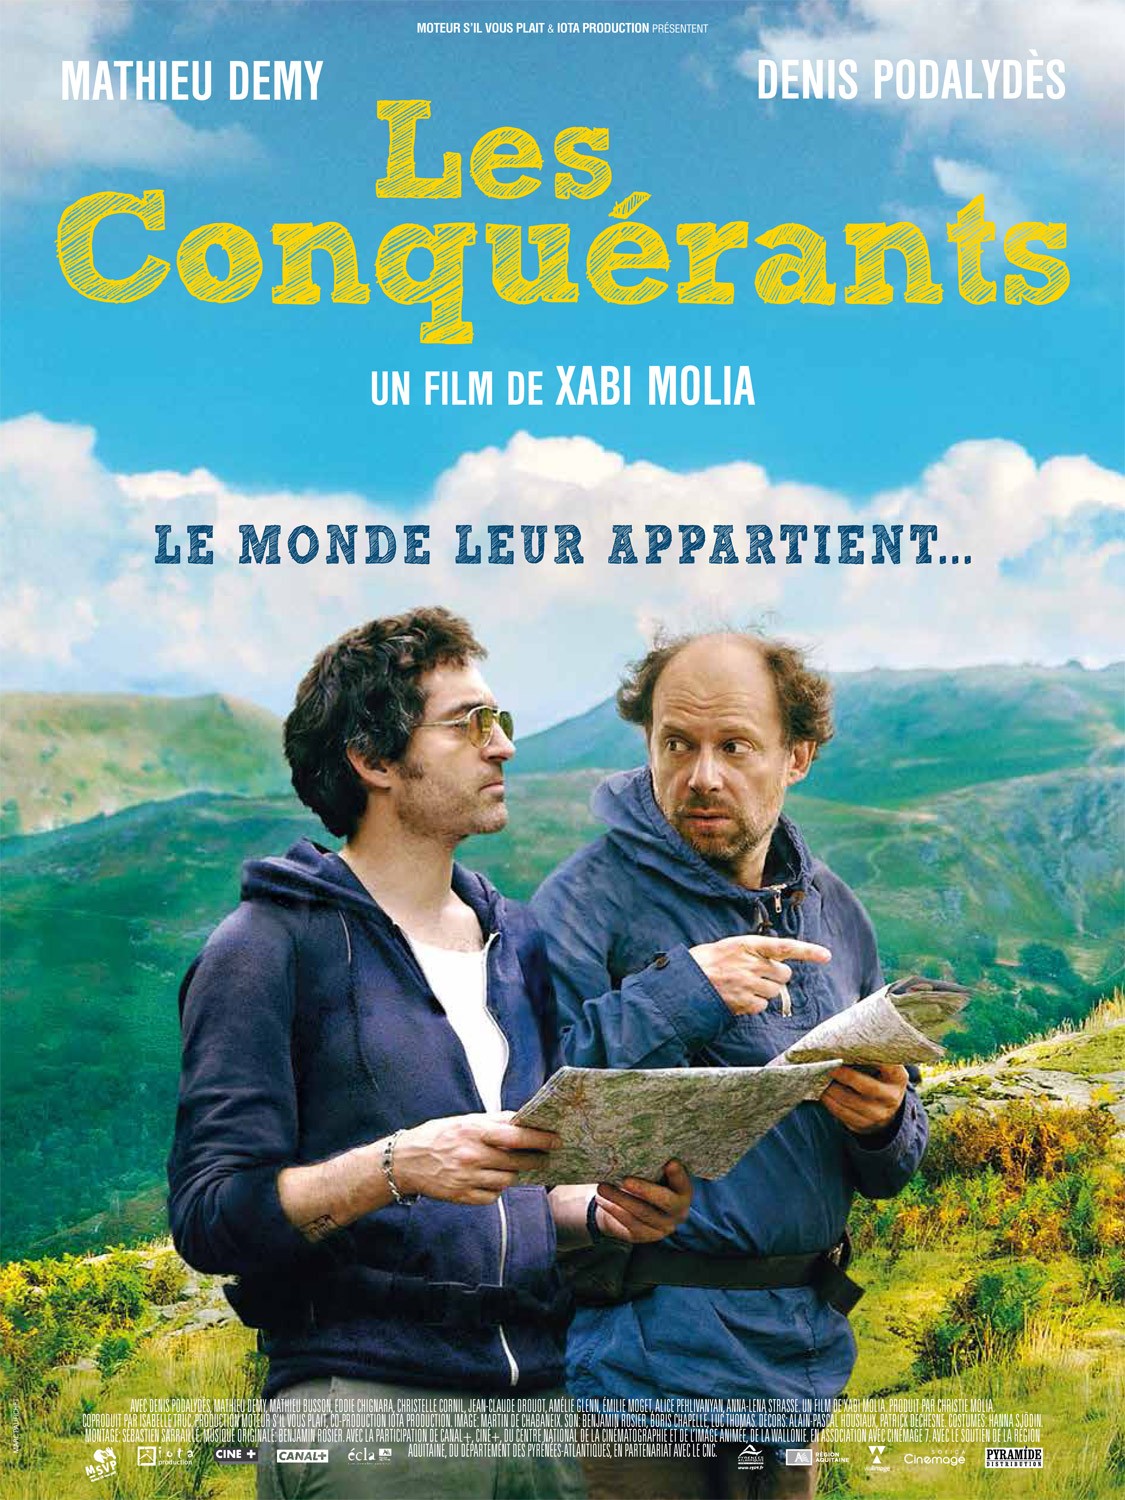 Extra Large Movie Poster Image for Les conquérants 